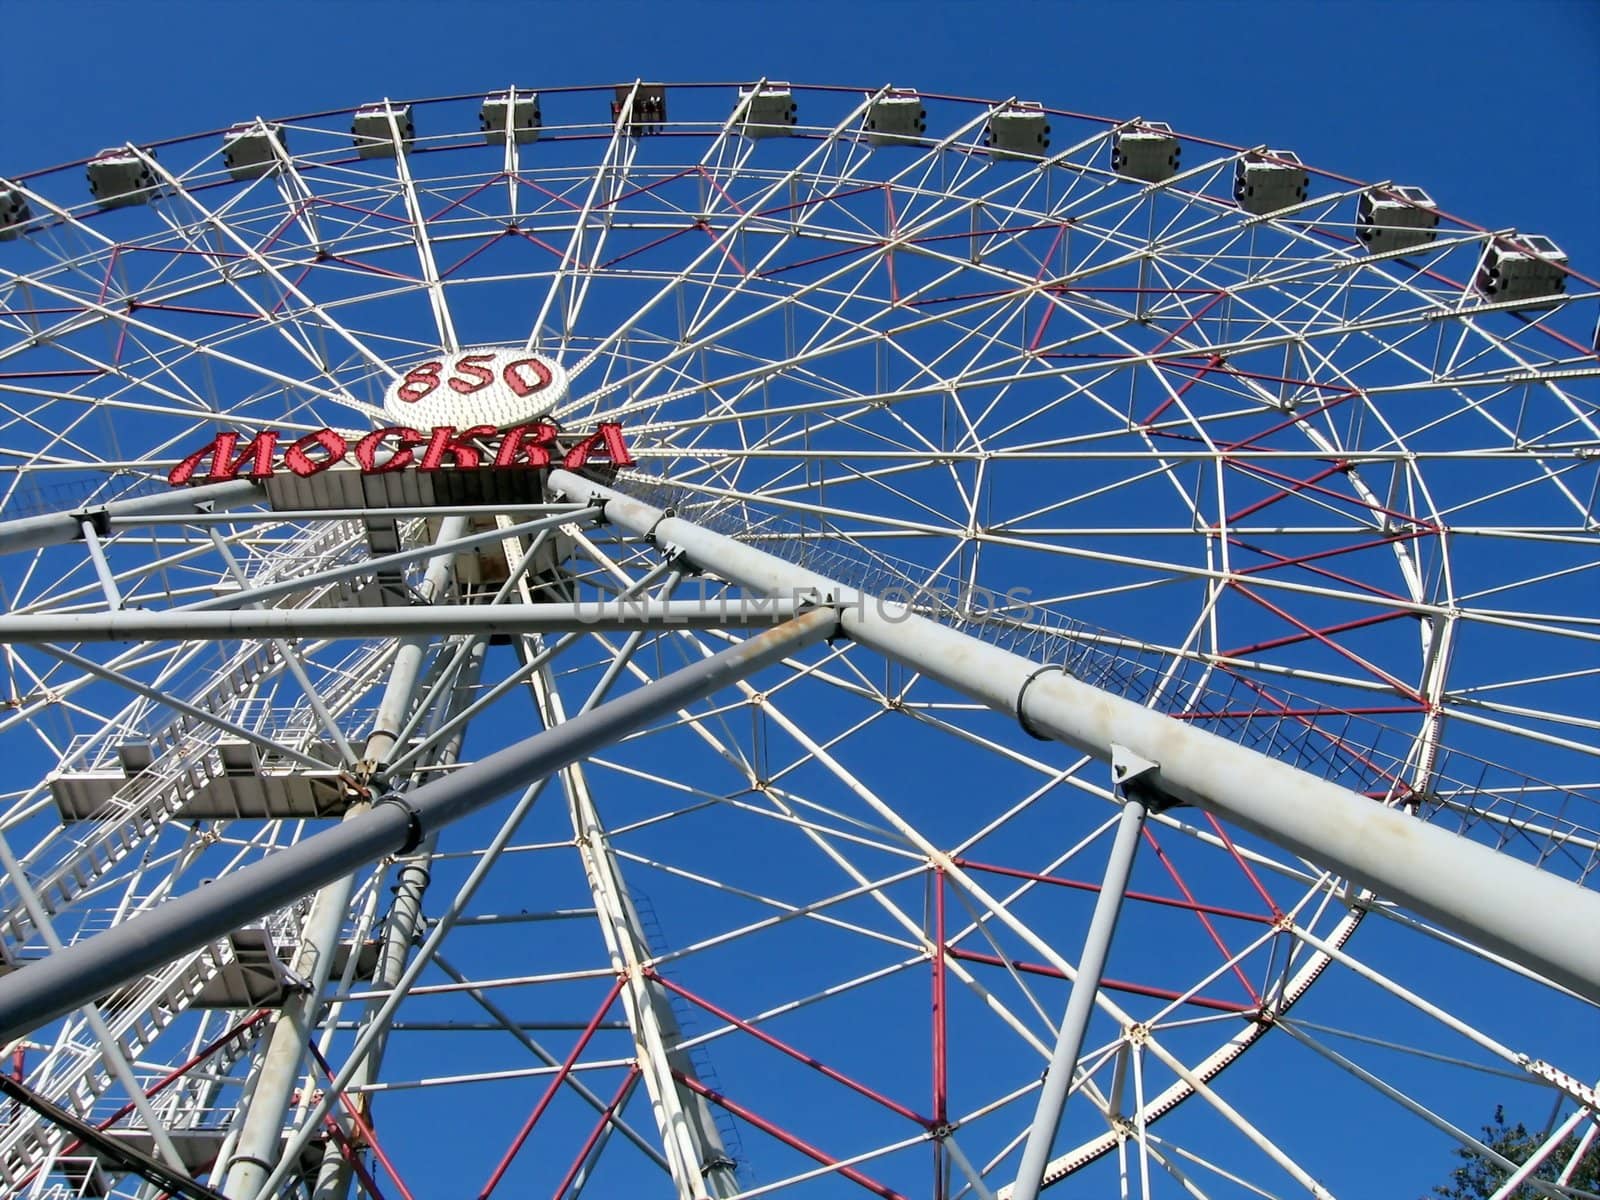 Large Moscow wheel on a background of blue sky